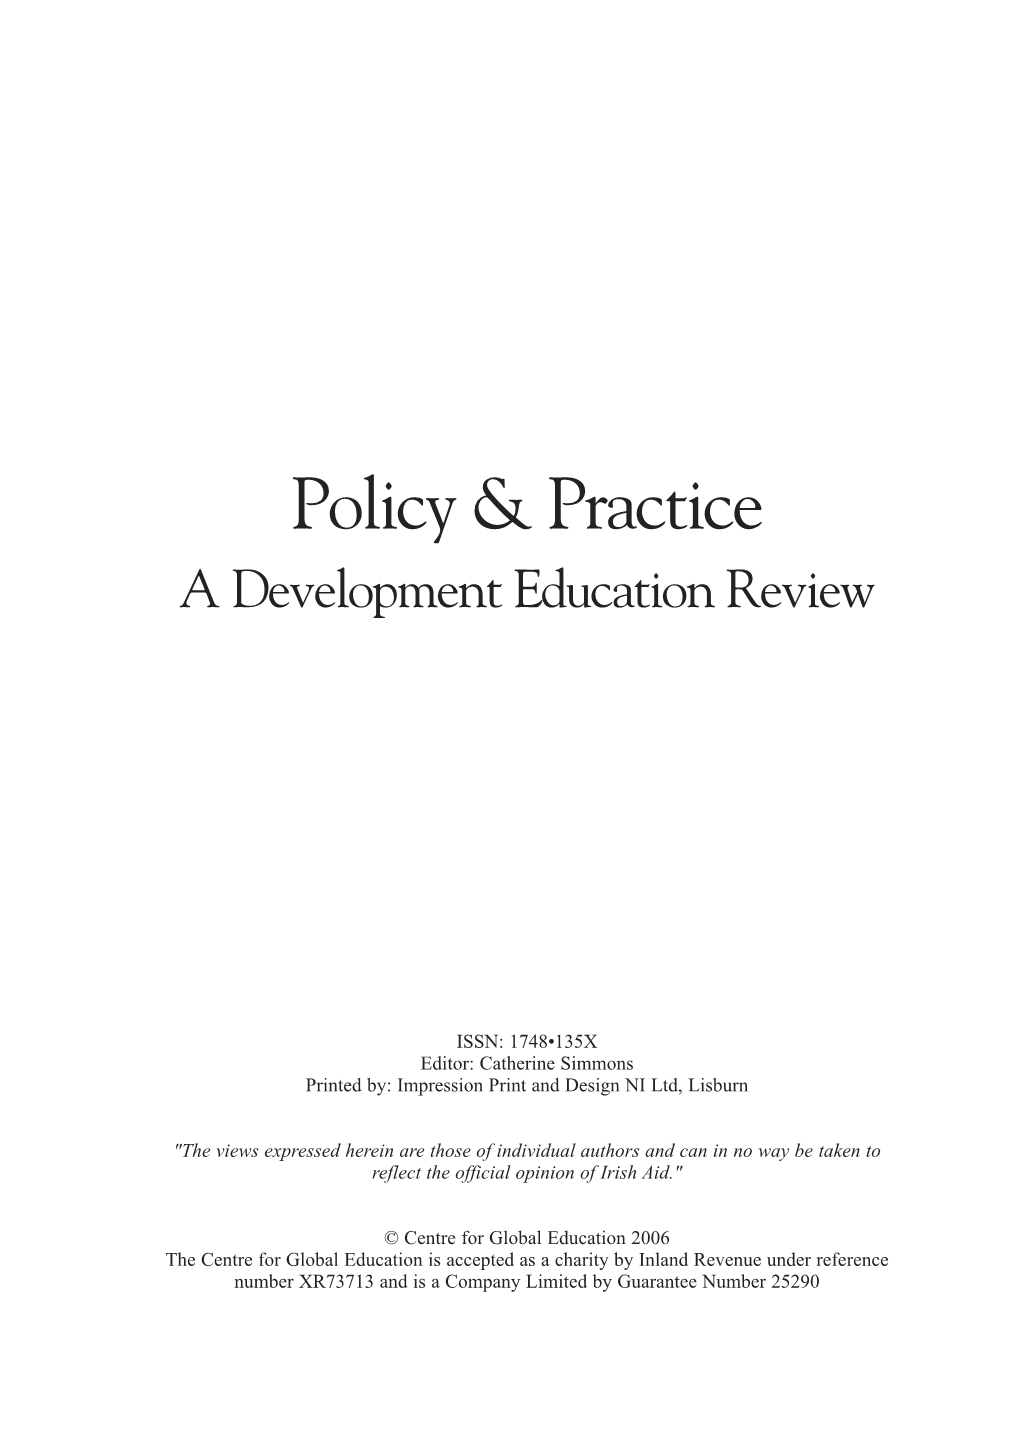 Policy & Practice